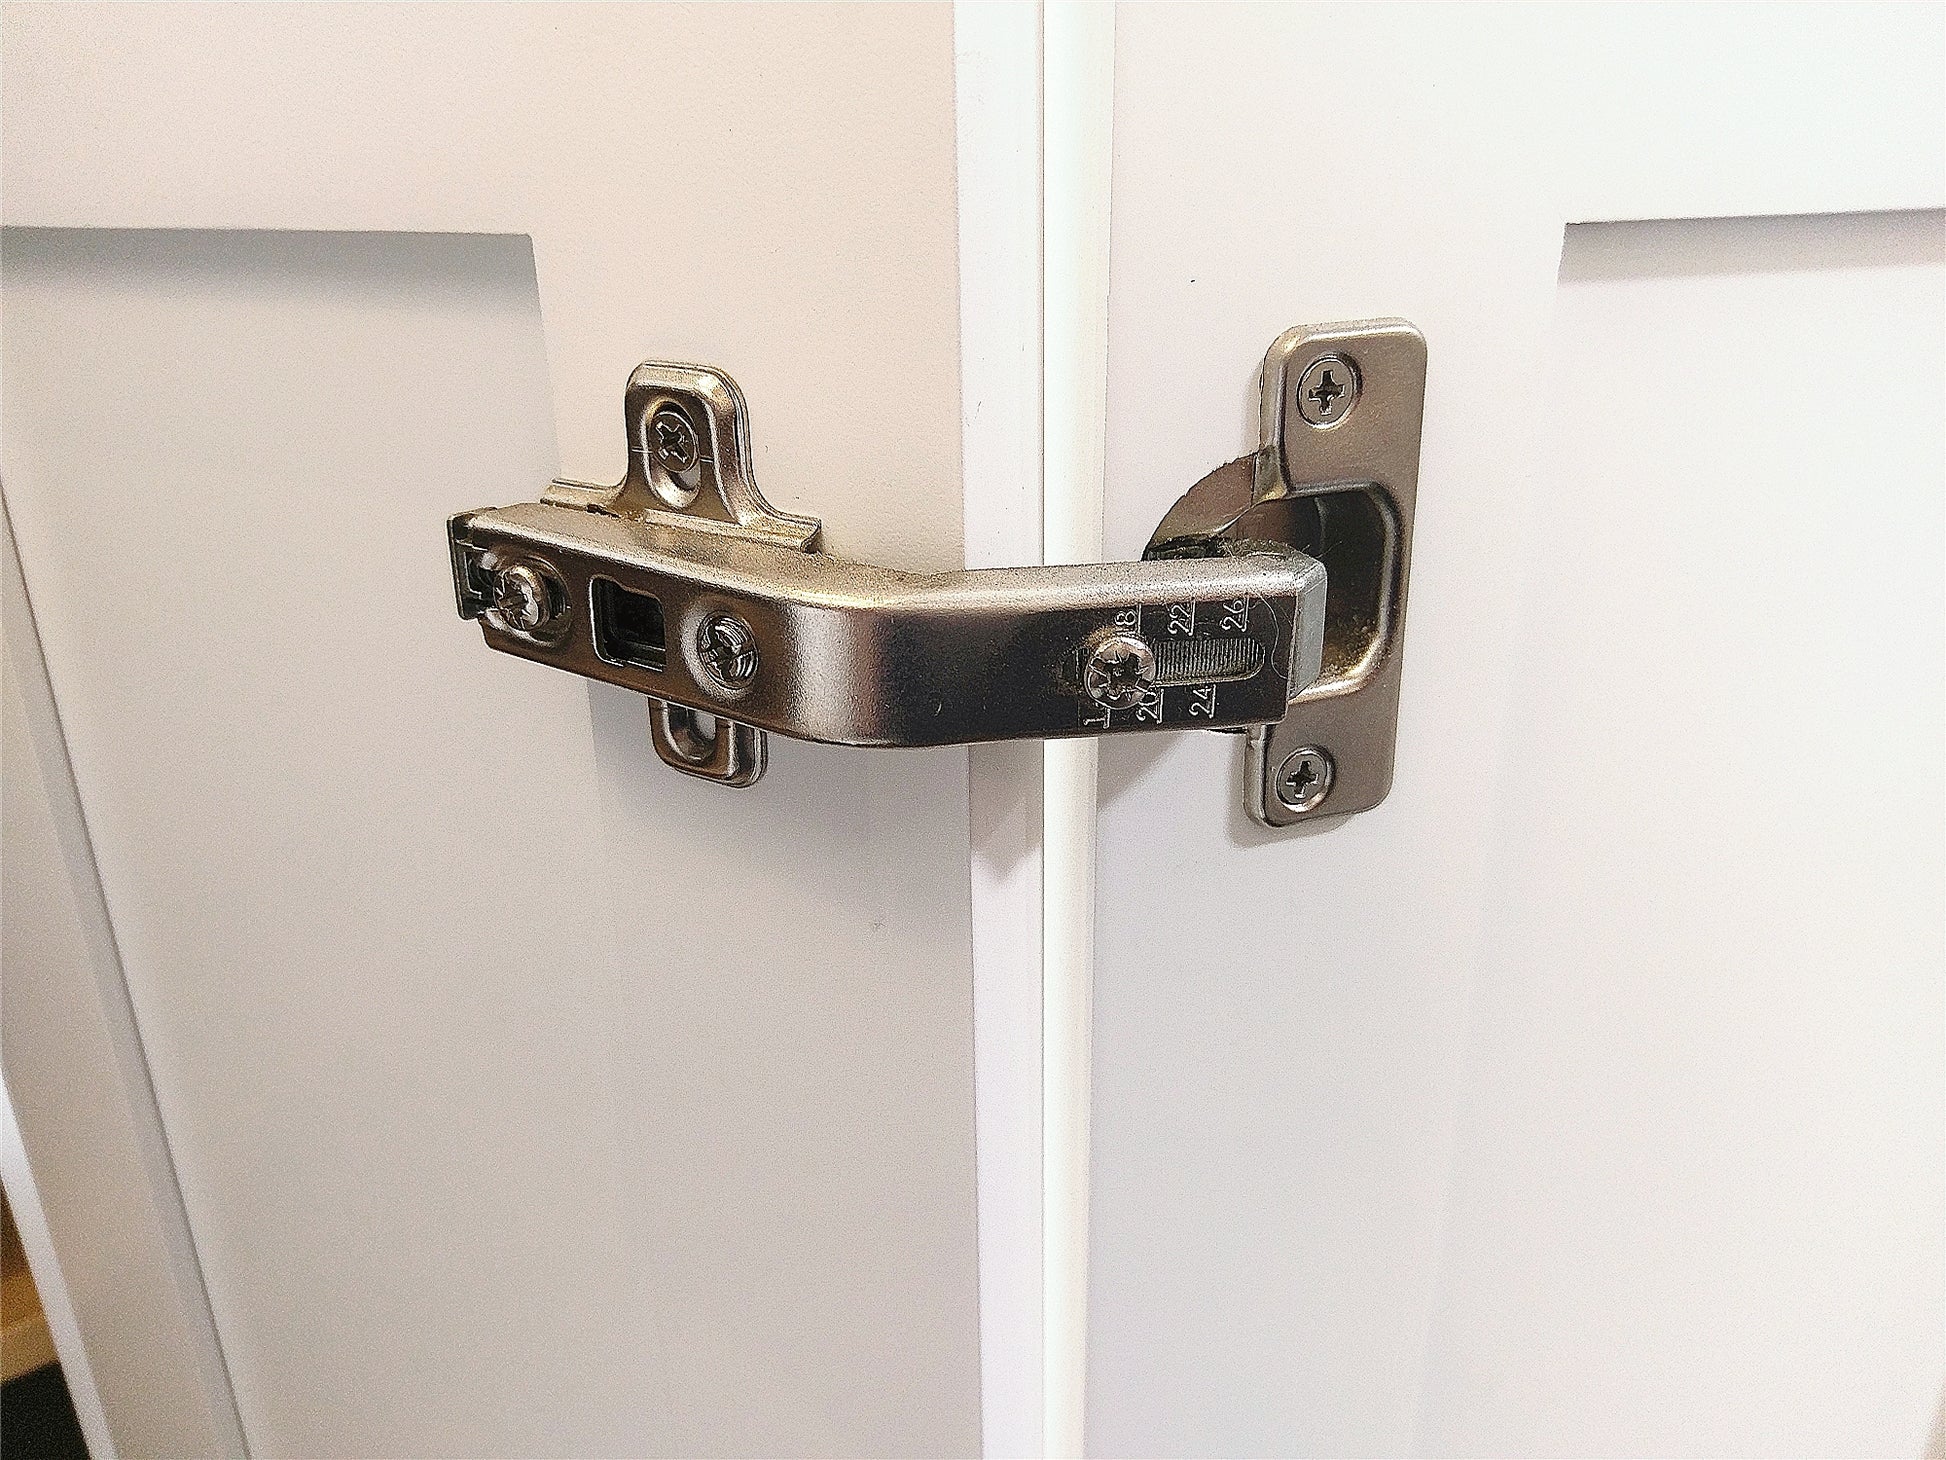 1 Piece Lazy Susan Hinge Face Frame Plate for Floded Door, Kitchen